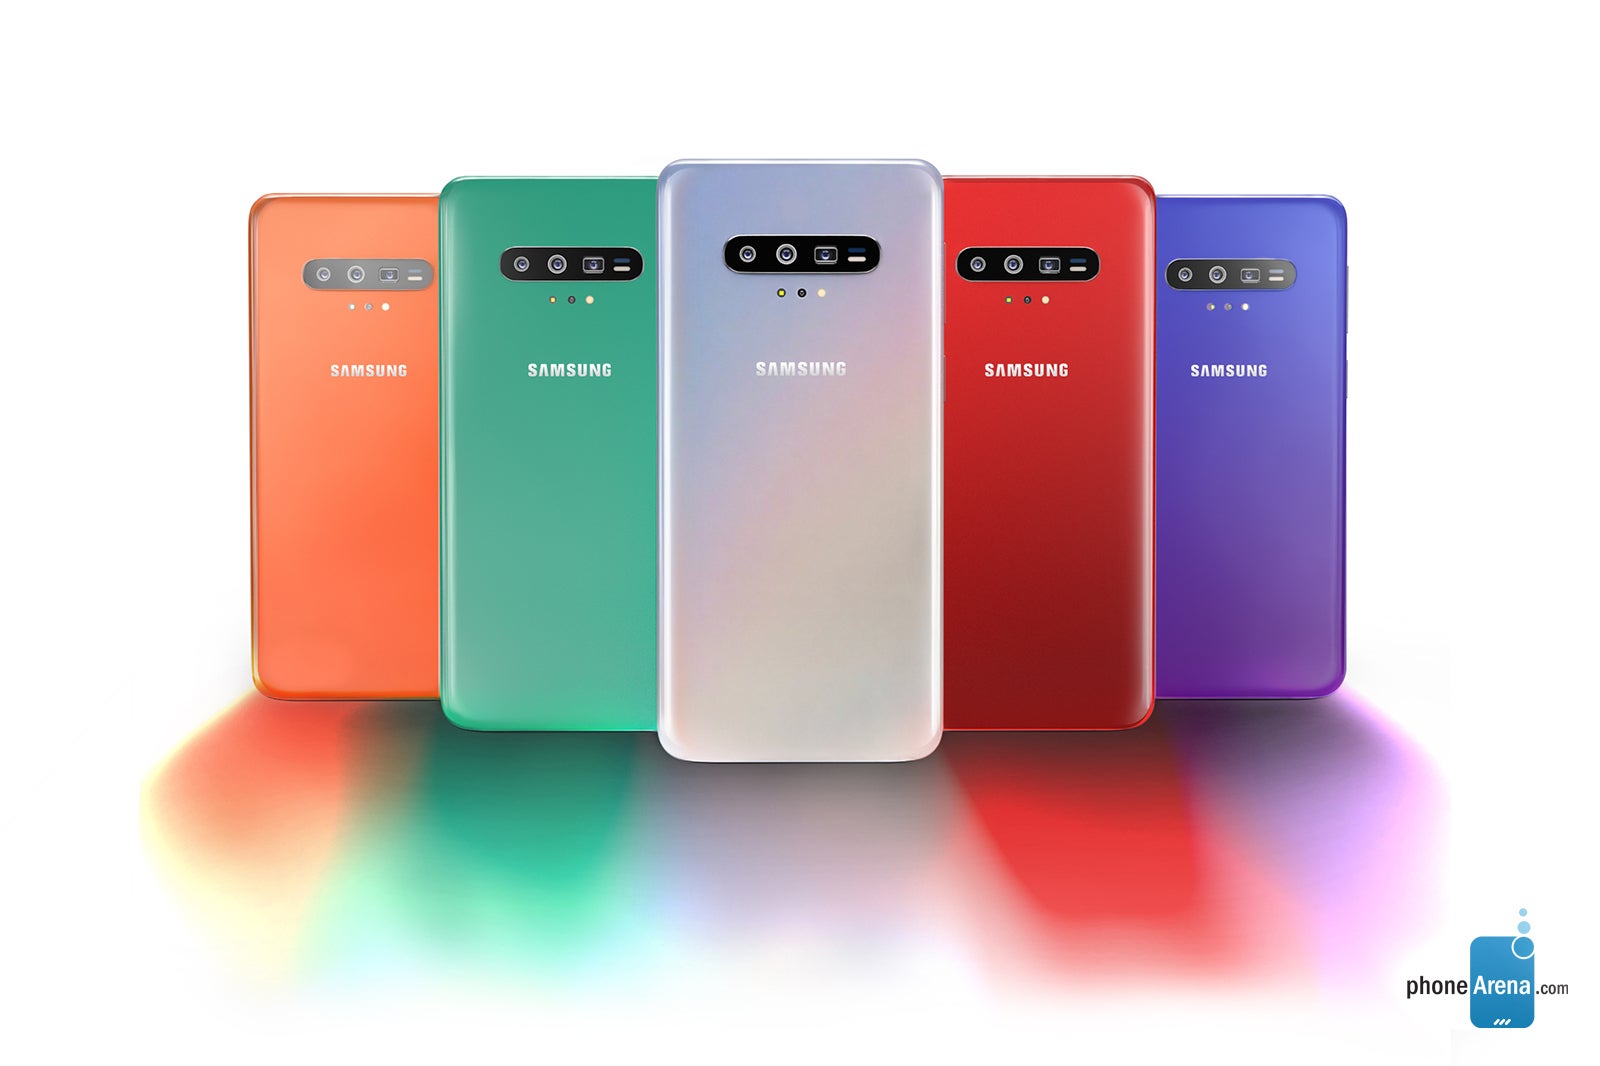 Samsung Galaxy S11 concept render - The Samsung Galaxy S11 series could introduce huge battery upgrades